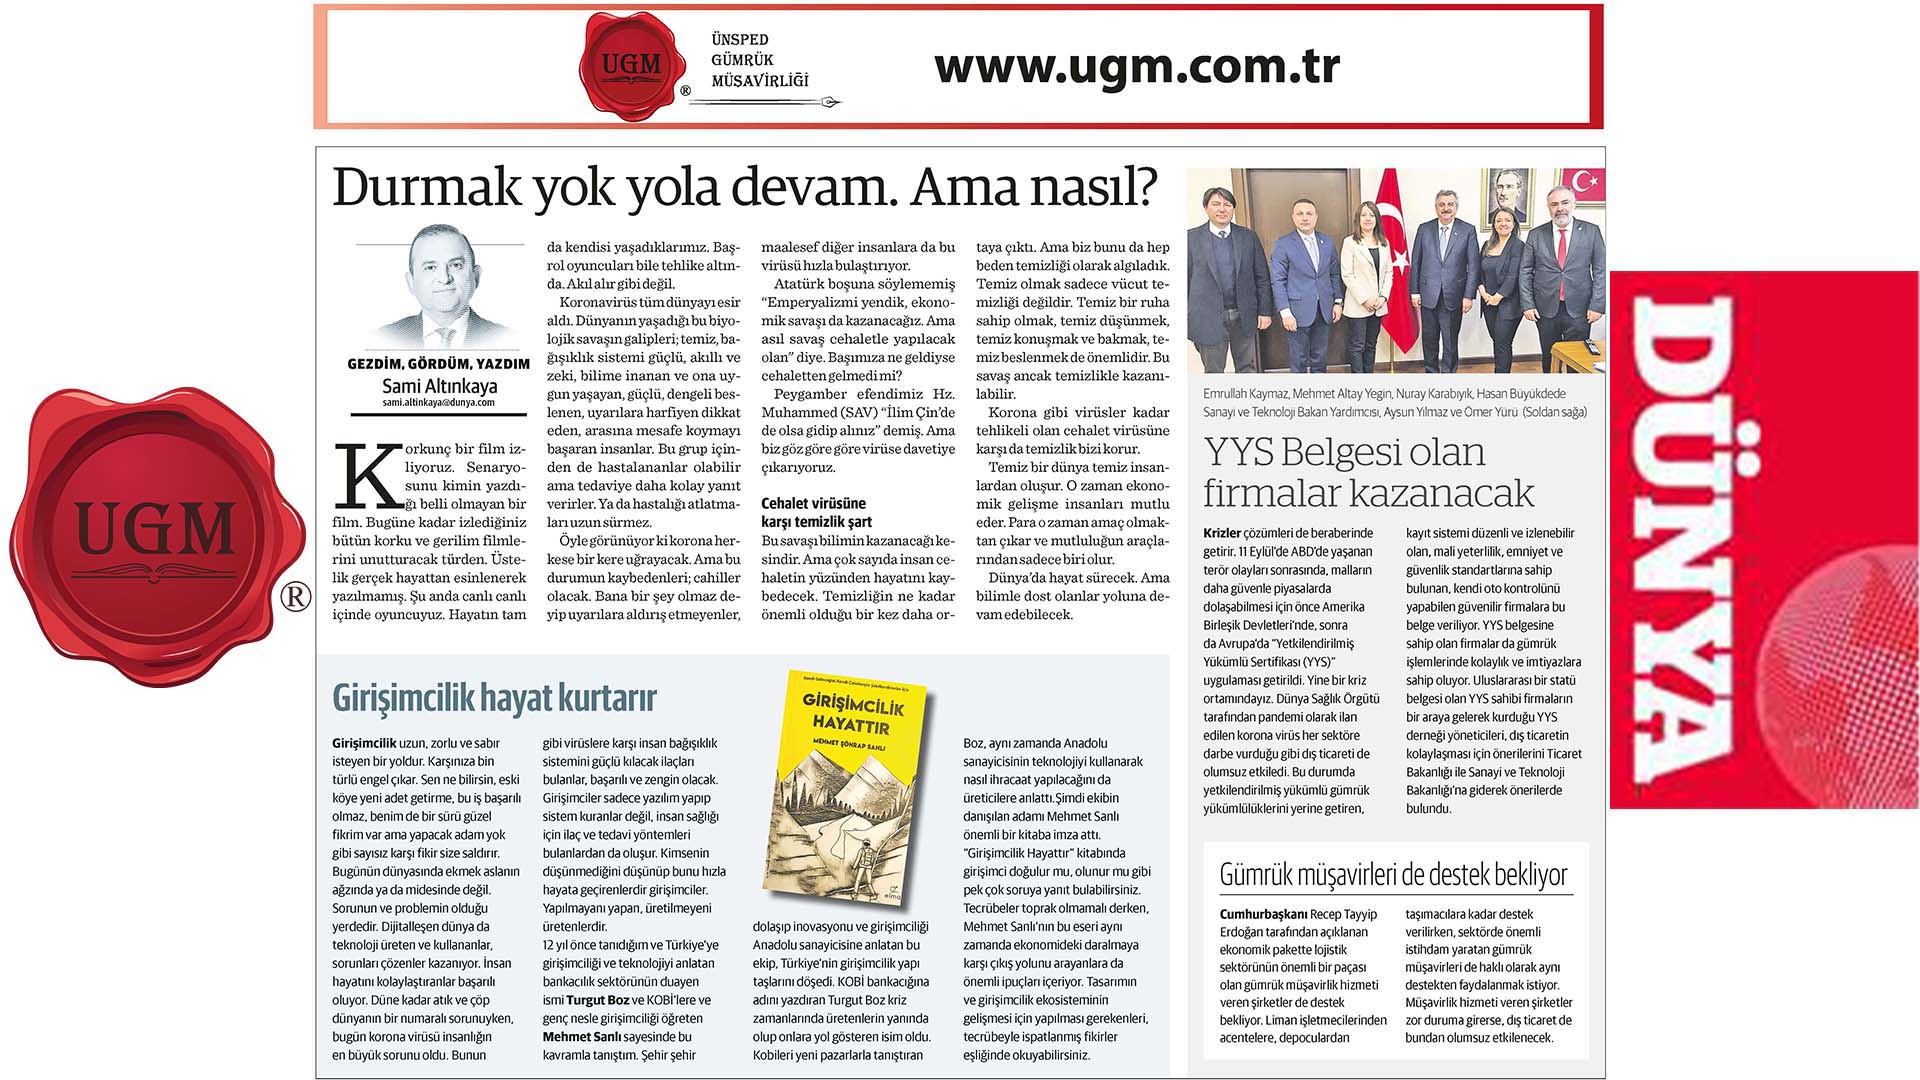 Our UGM Corporate Communications Director Mr. Sami Altınkaya's article titled "No Stopping, Keep Going but How?" was published in Dünya Newspaper on 30.03.2020